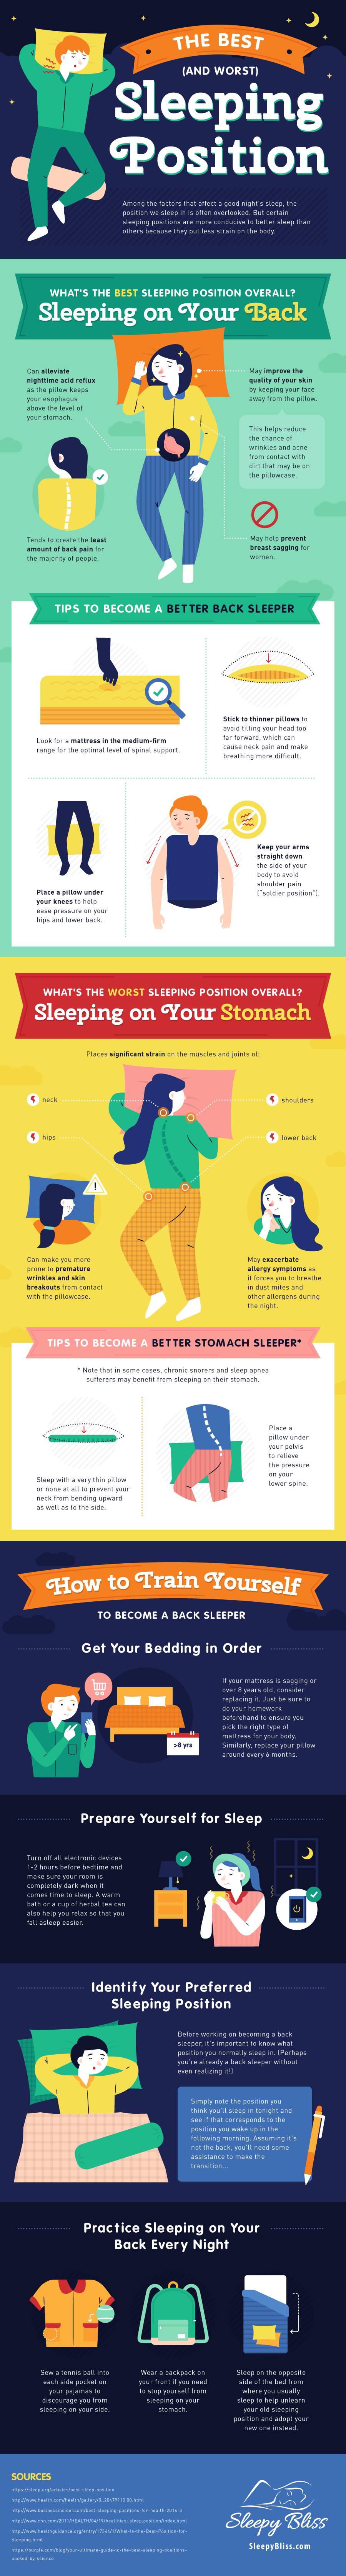 The Best (And Worst) Sleeping Position [Infographic]